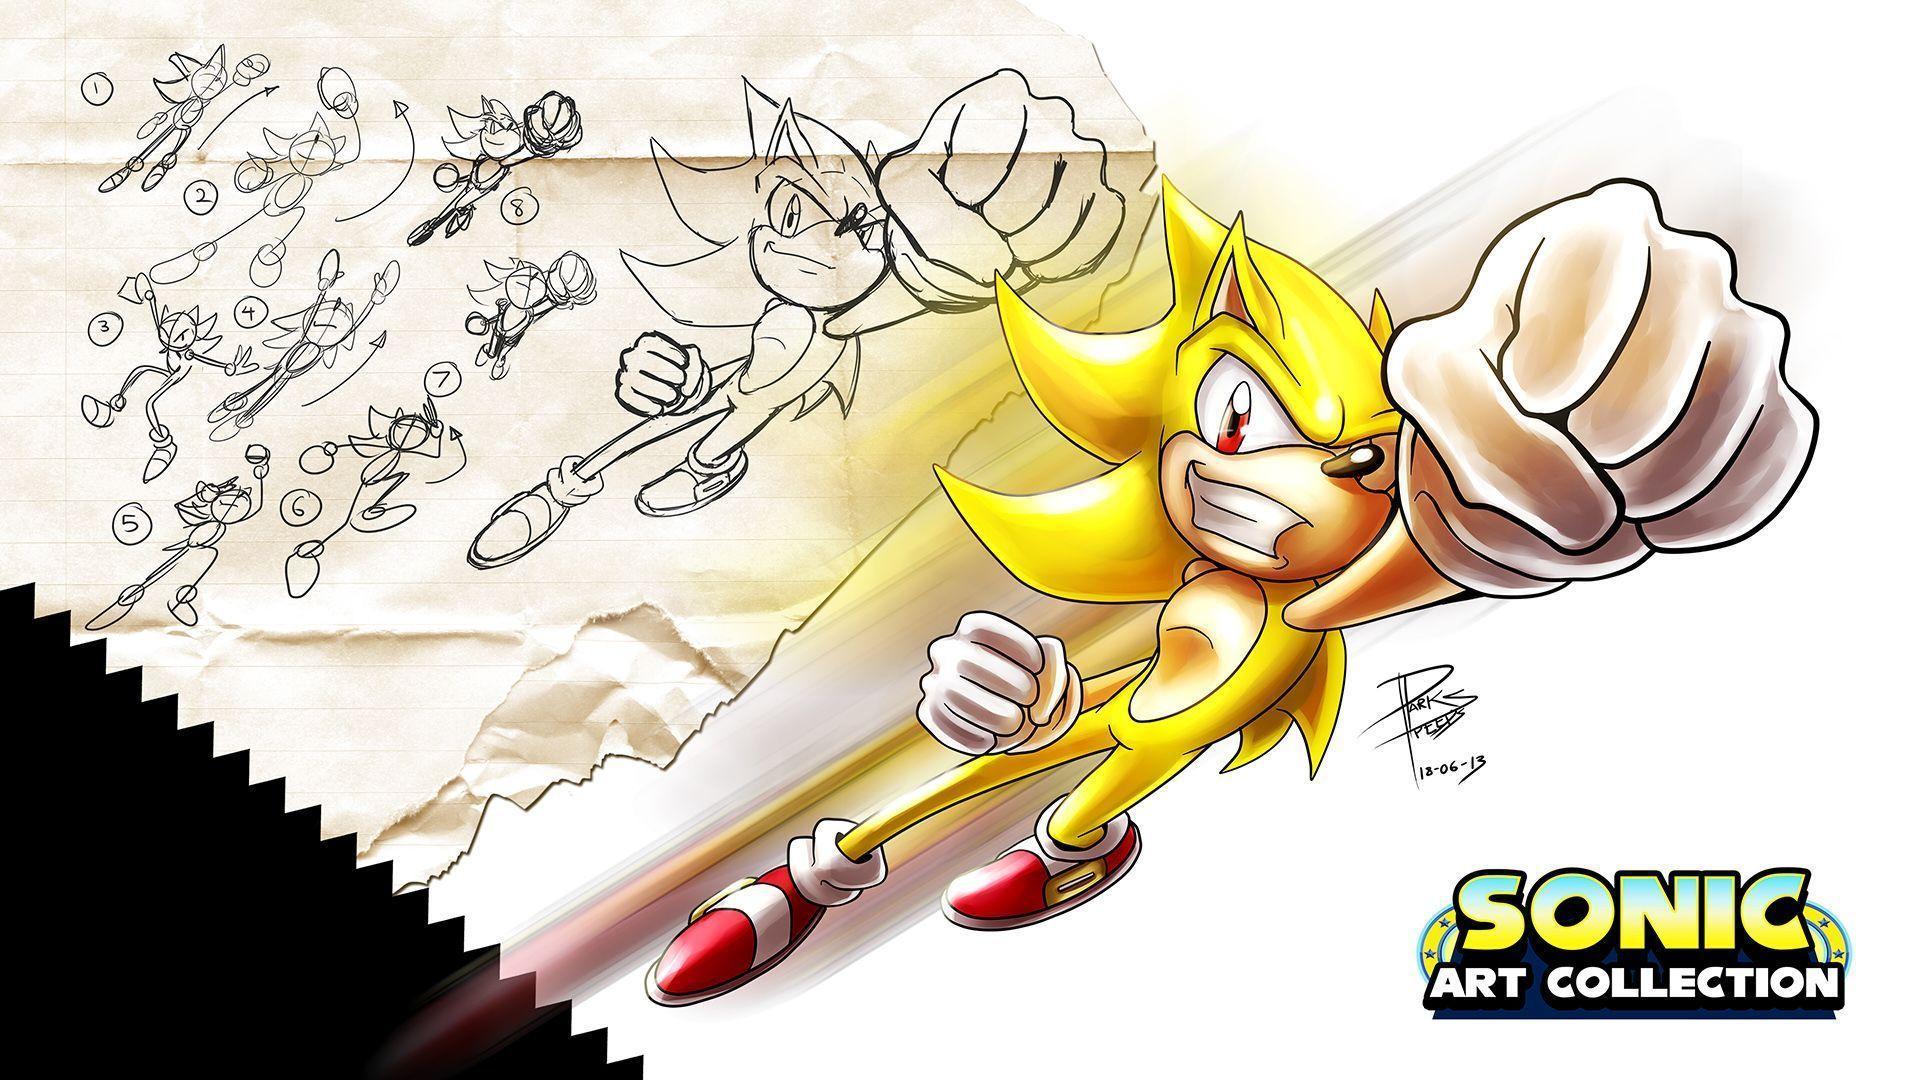 Sonic Art Collection (SUPERSONIC WALLPAPER)